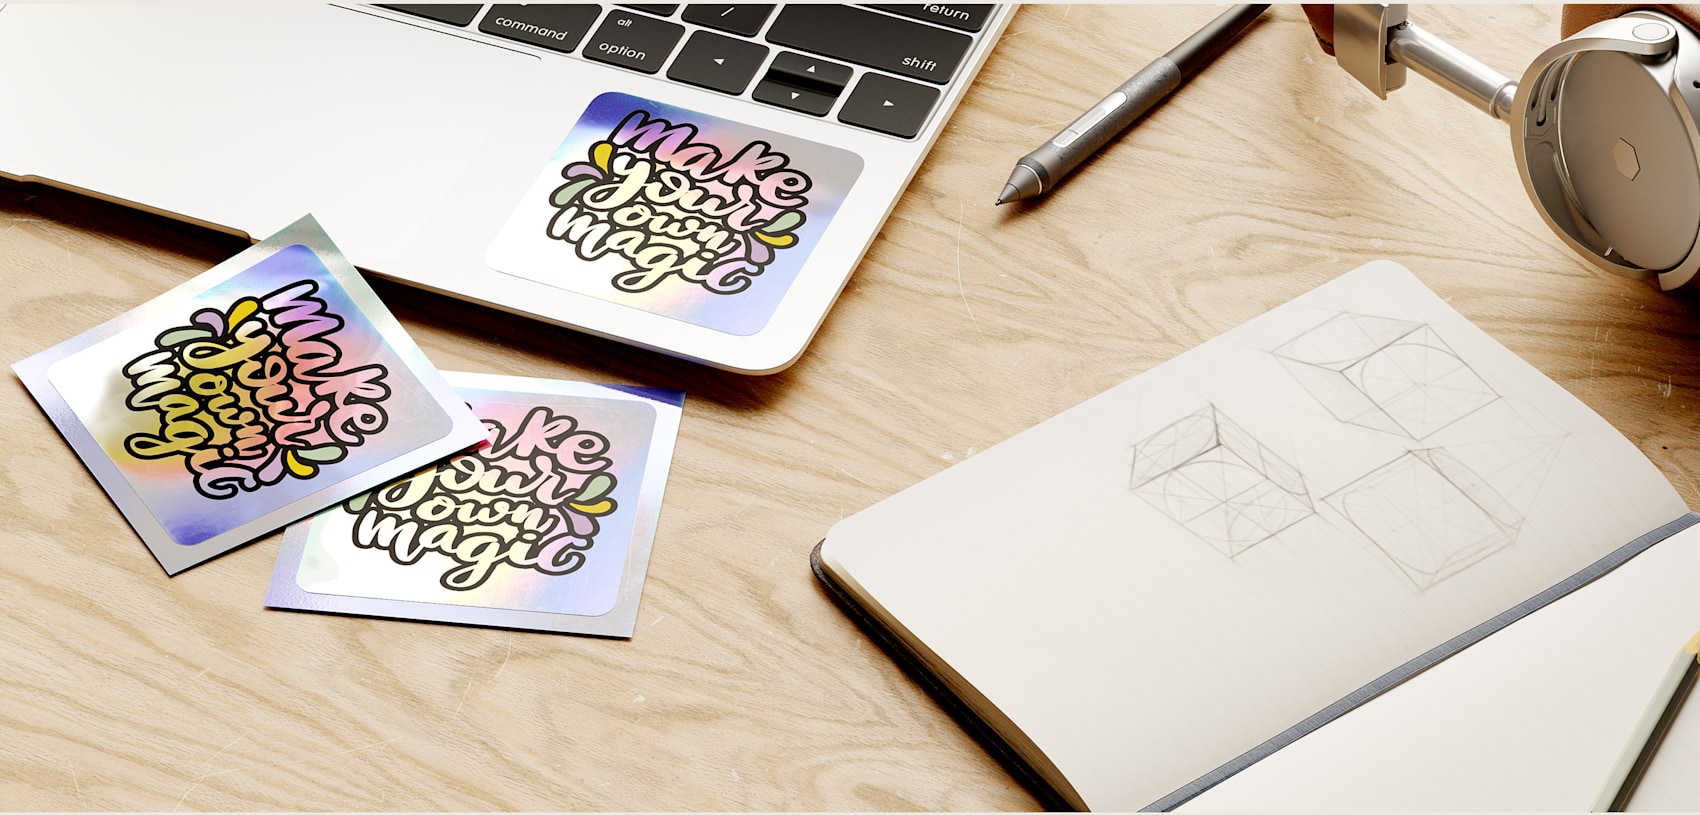 Larger version: Square holographic stickers